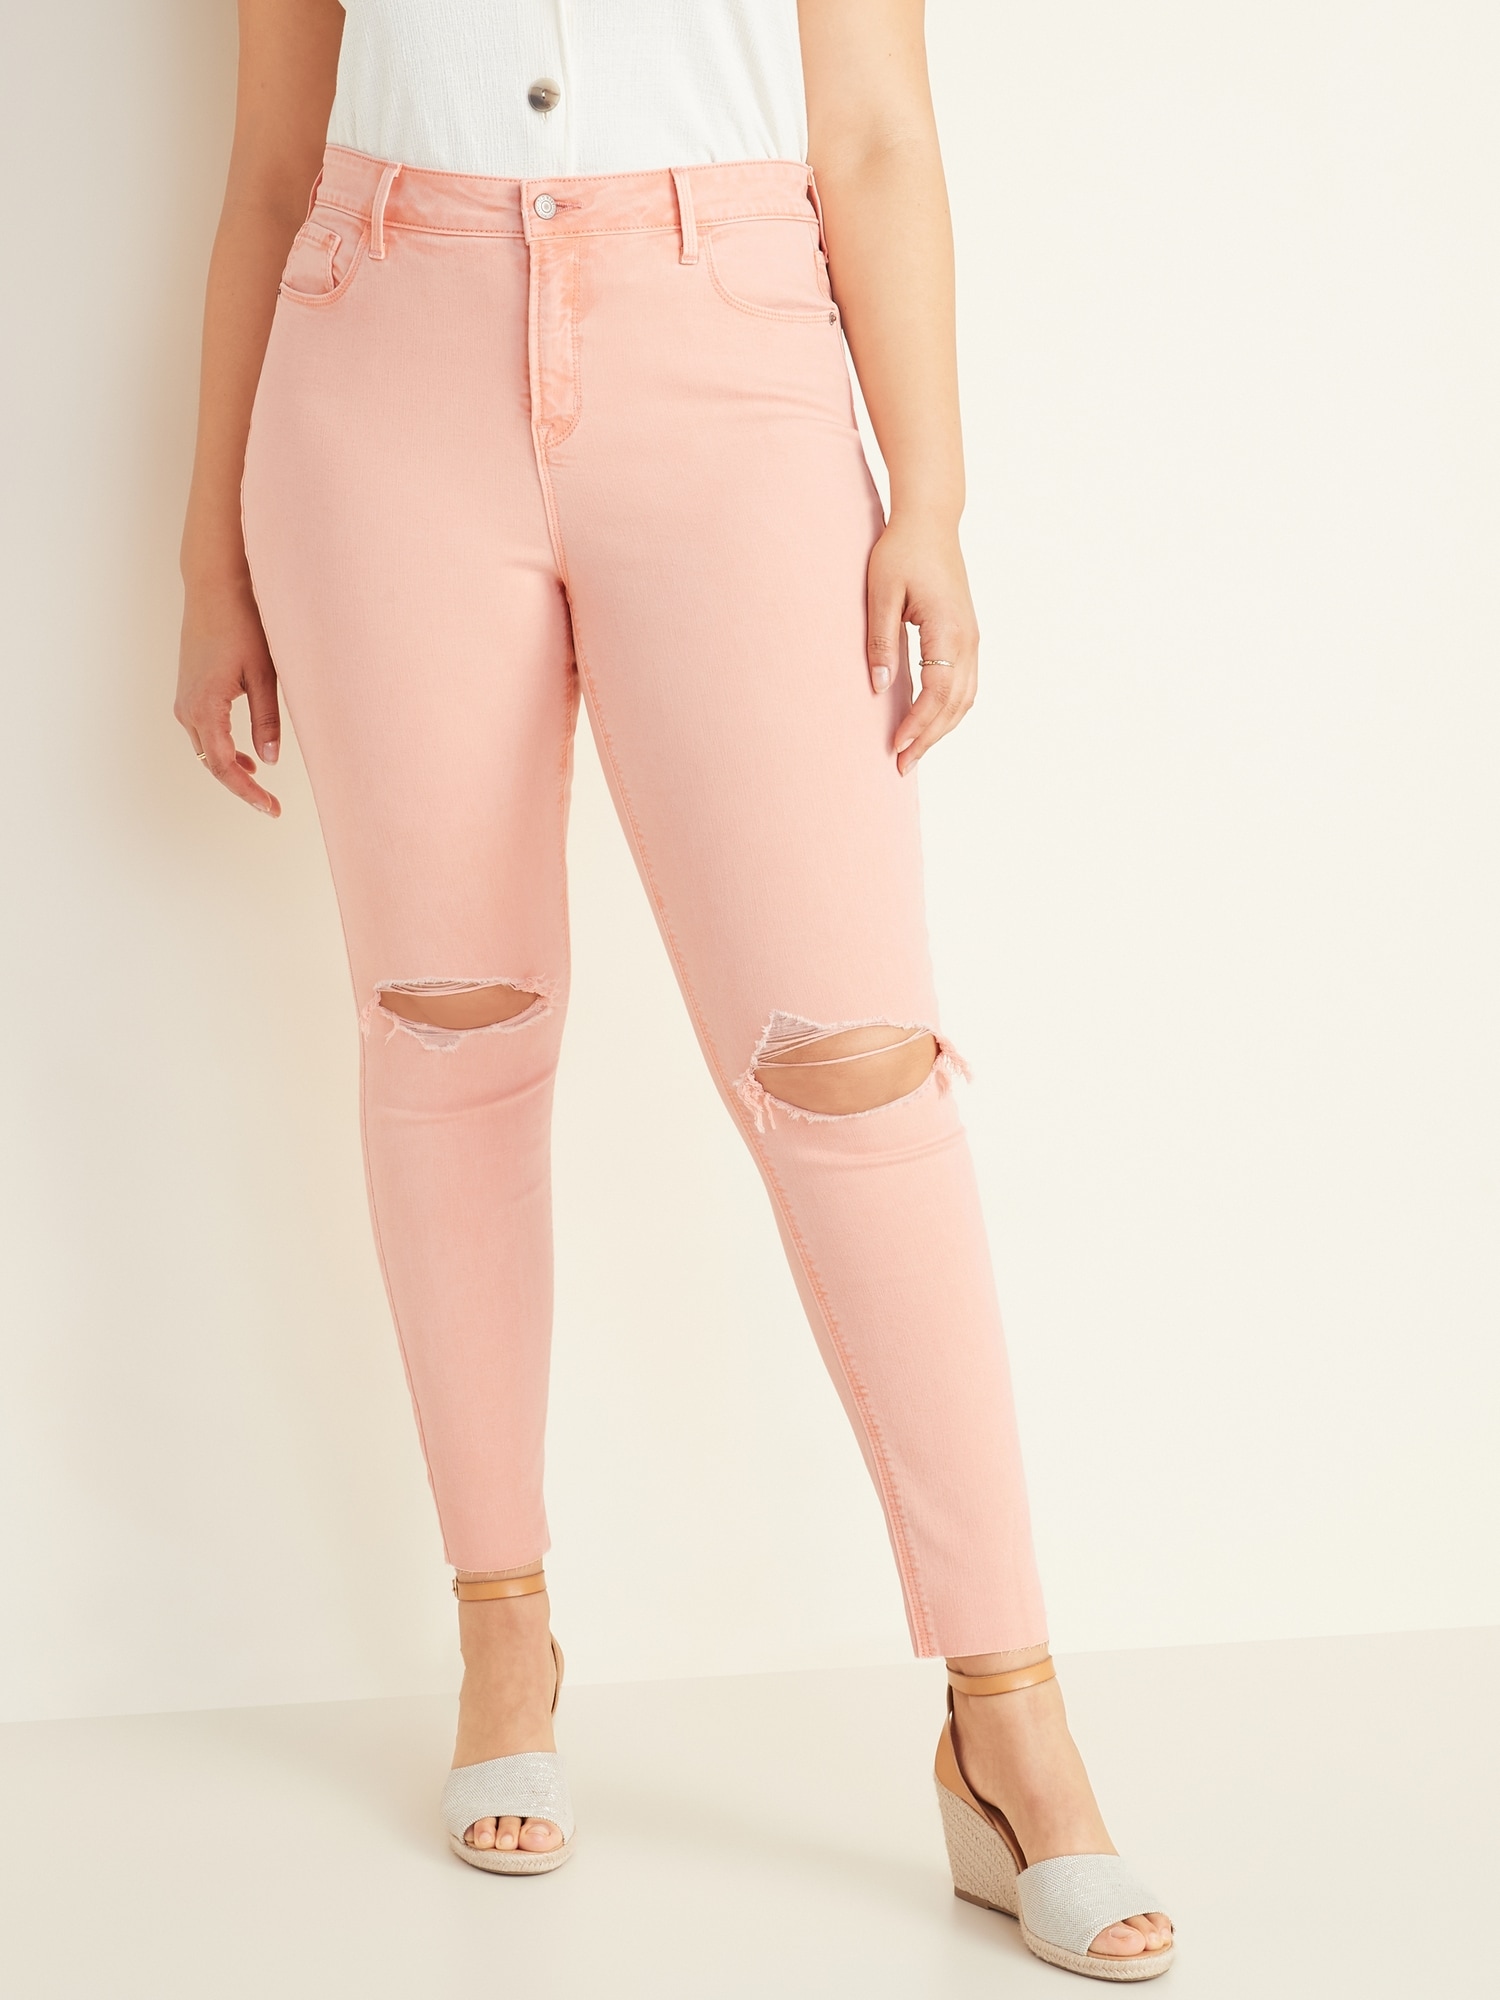 pink jeans high waisted